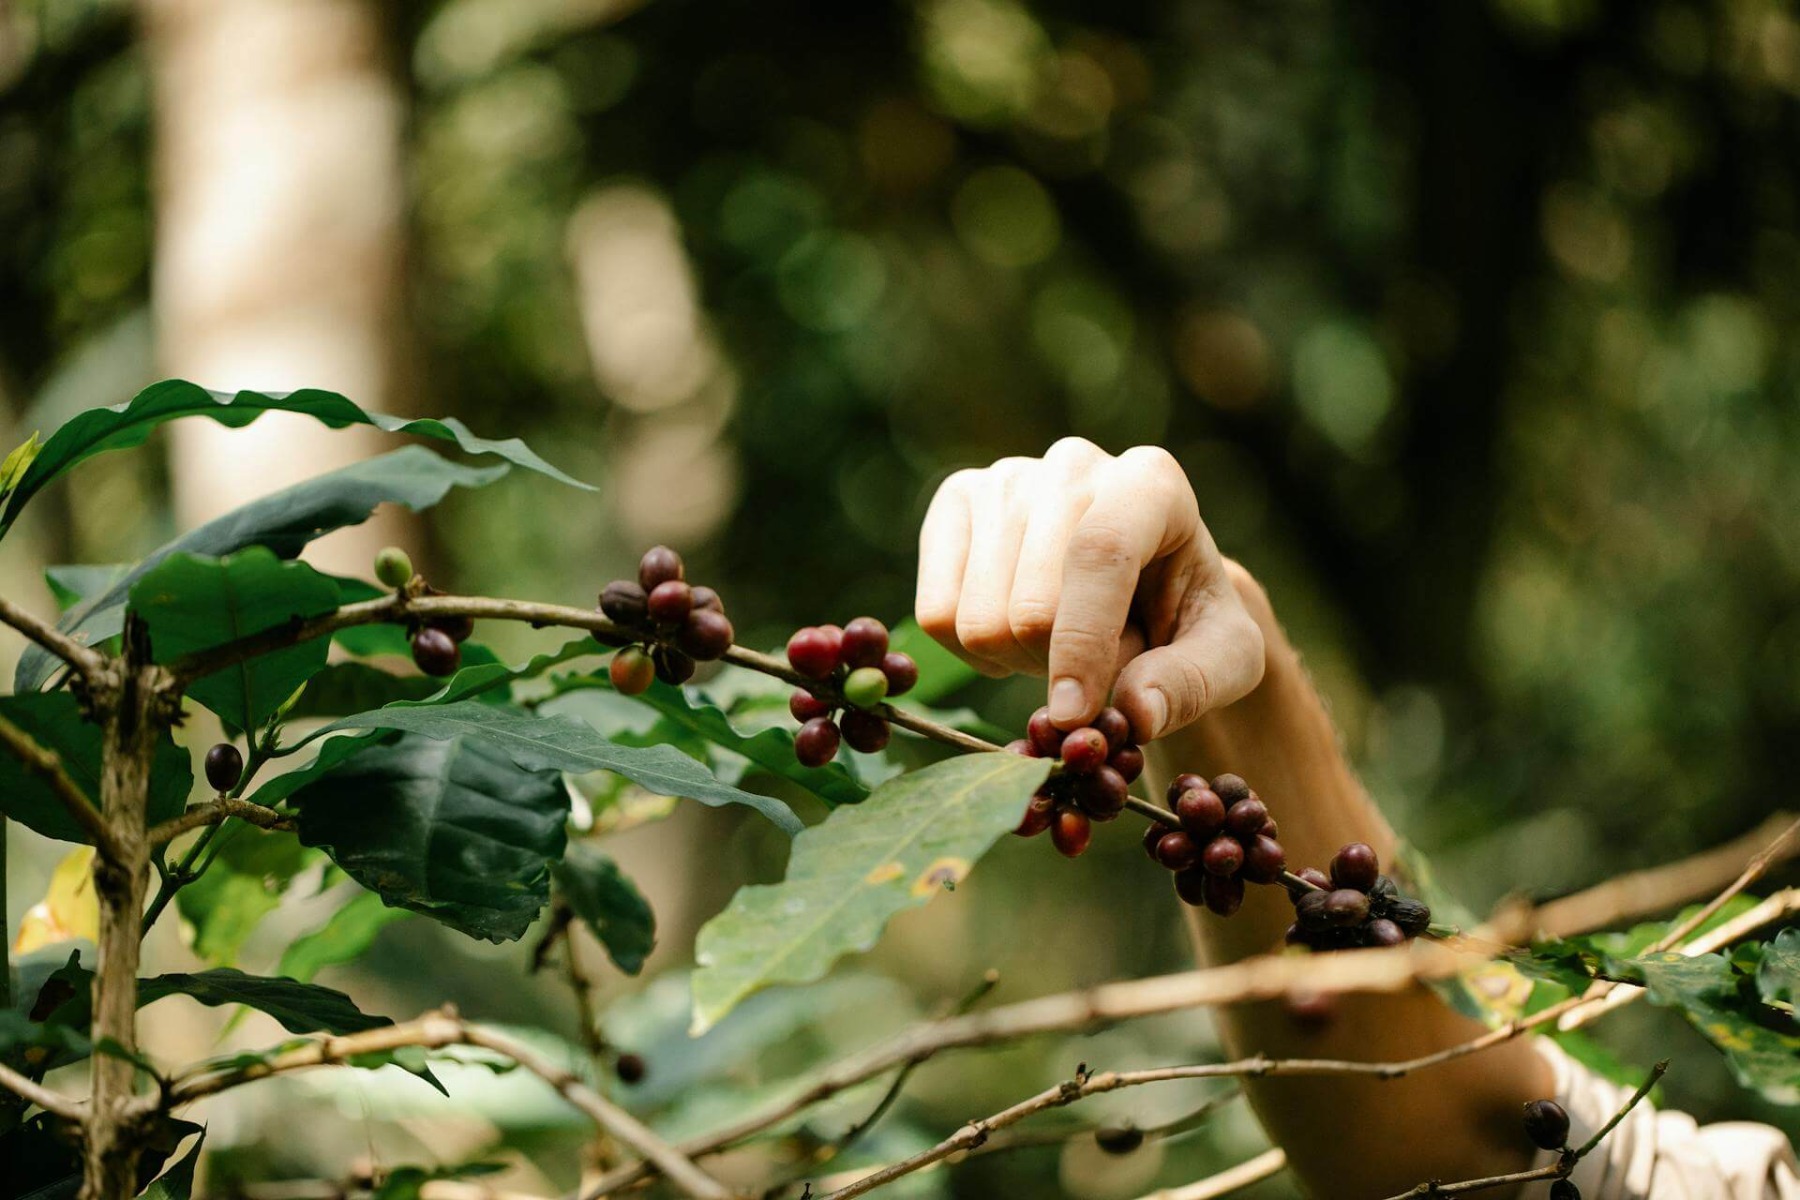 Crop farmer picking arabica coffee berries from plant in countryside